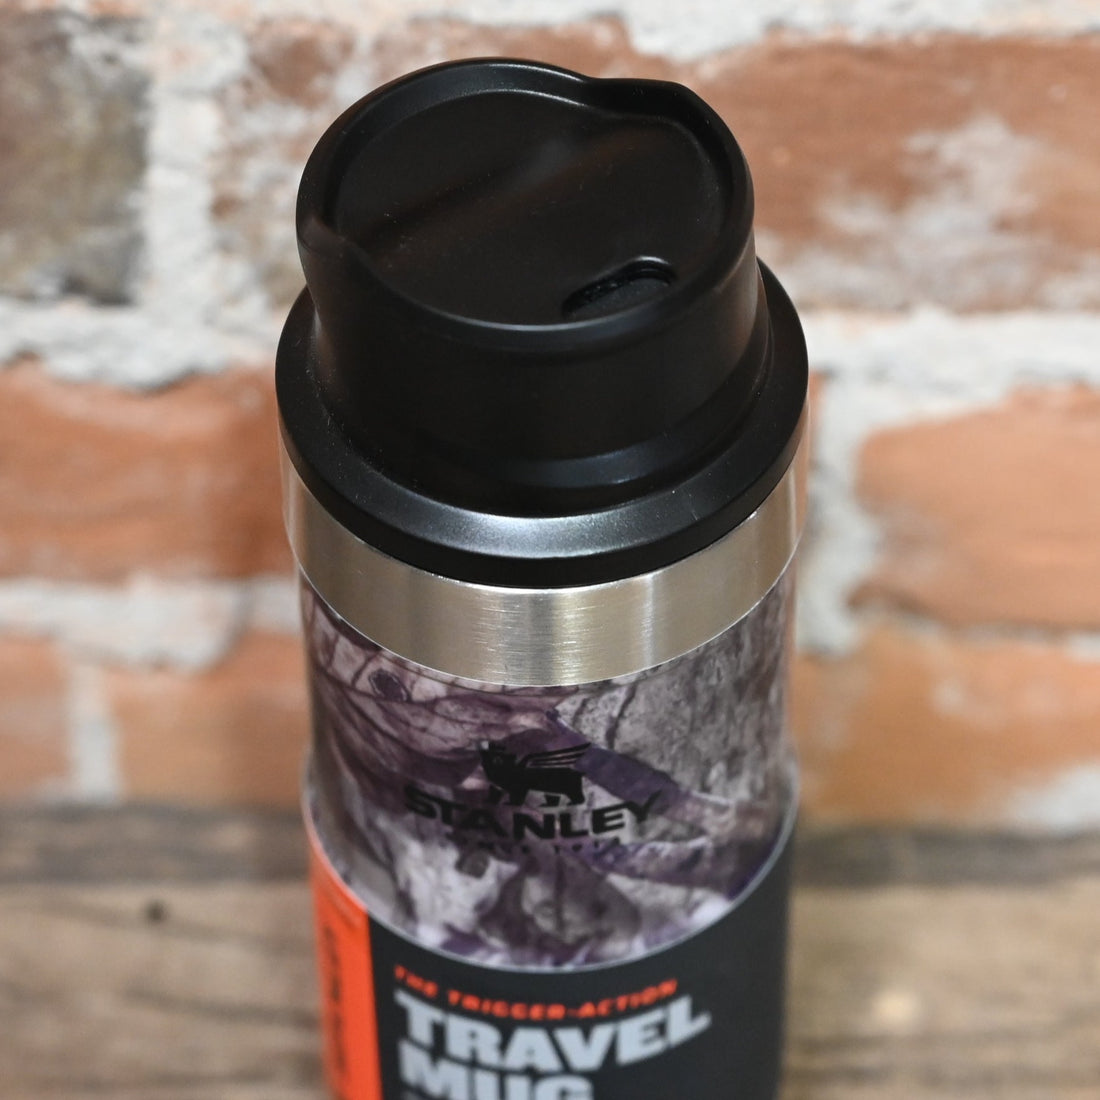 Stanley Trigger-Action Travel Mug in Country DNA